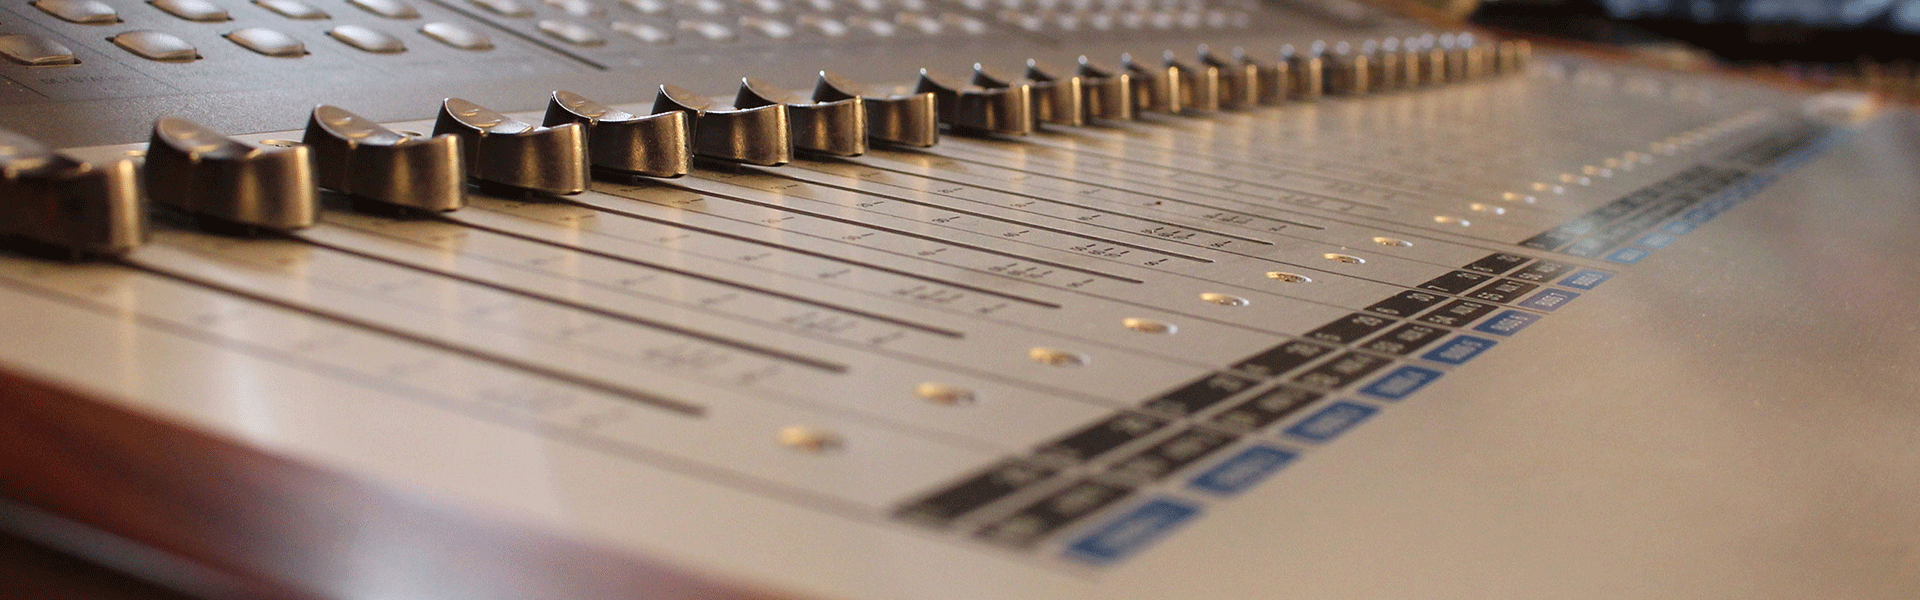 Image of a mixing console